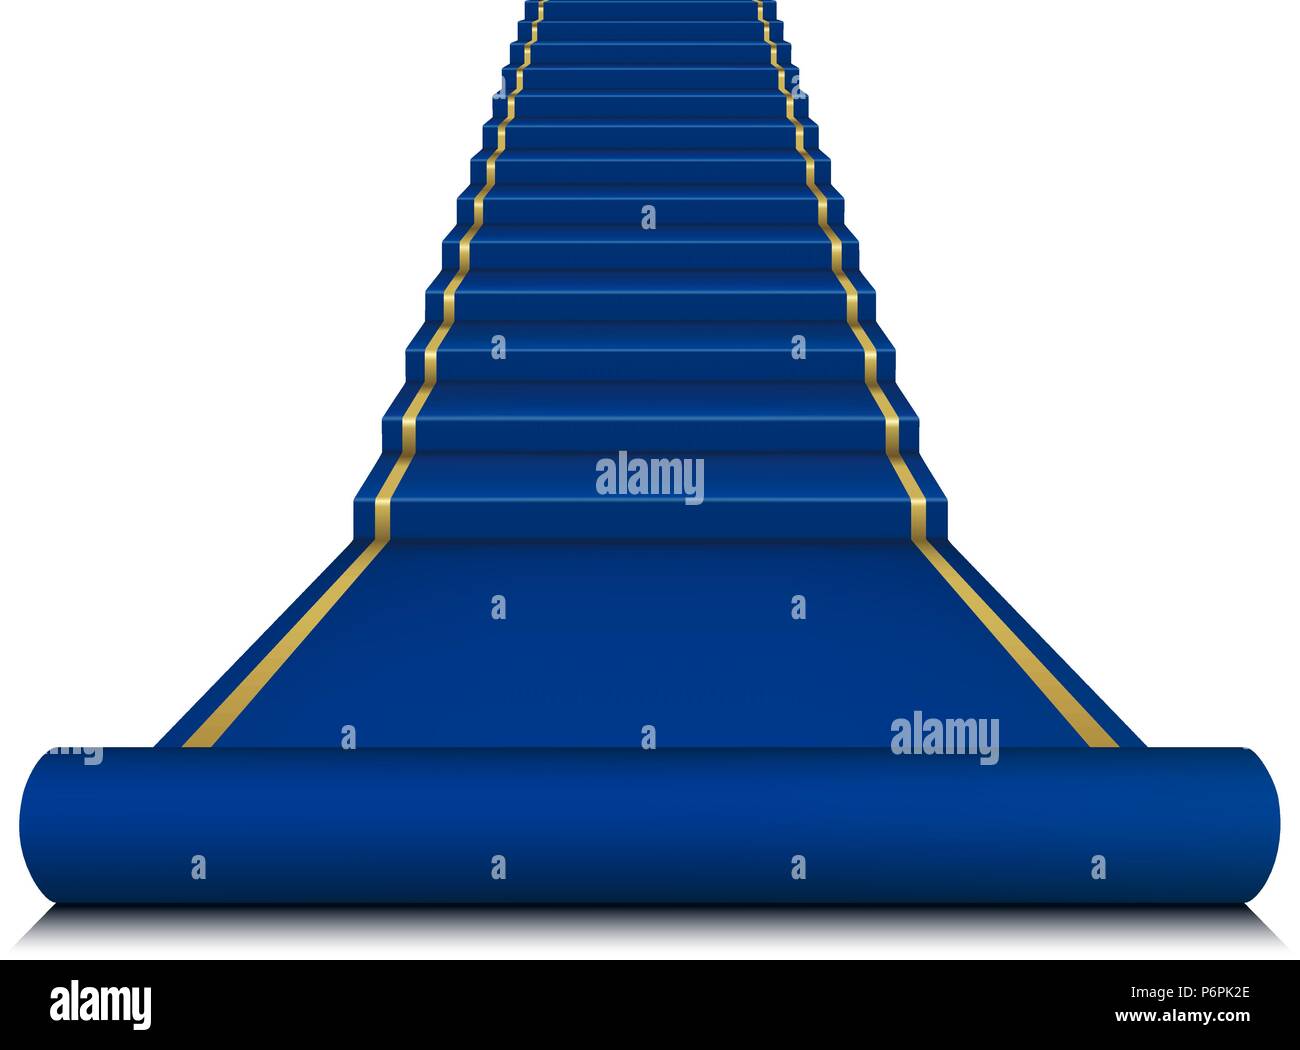 Blue carpet with ladder. Mesh. Stock Vector